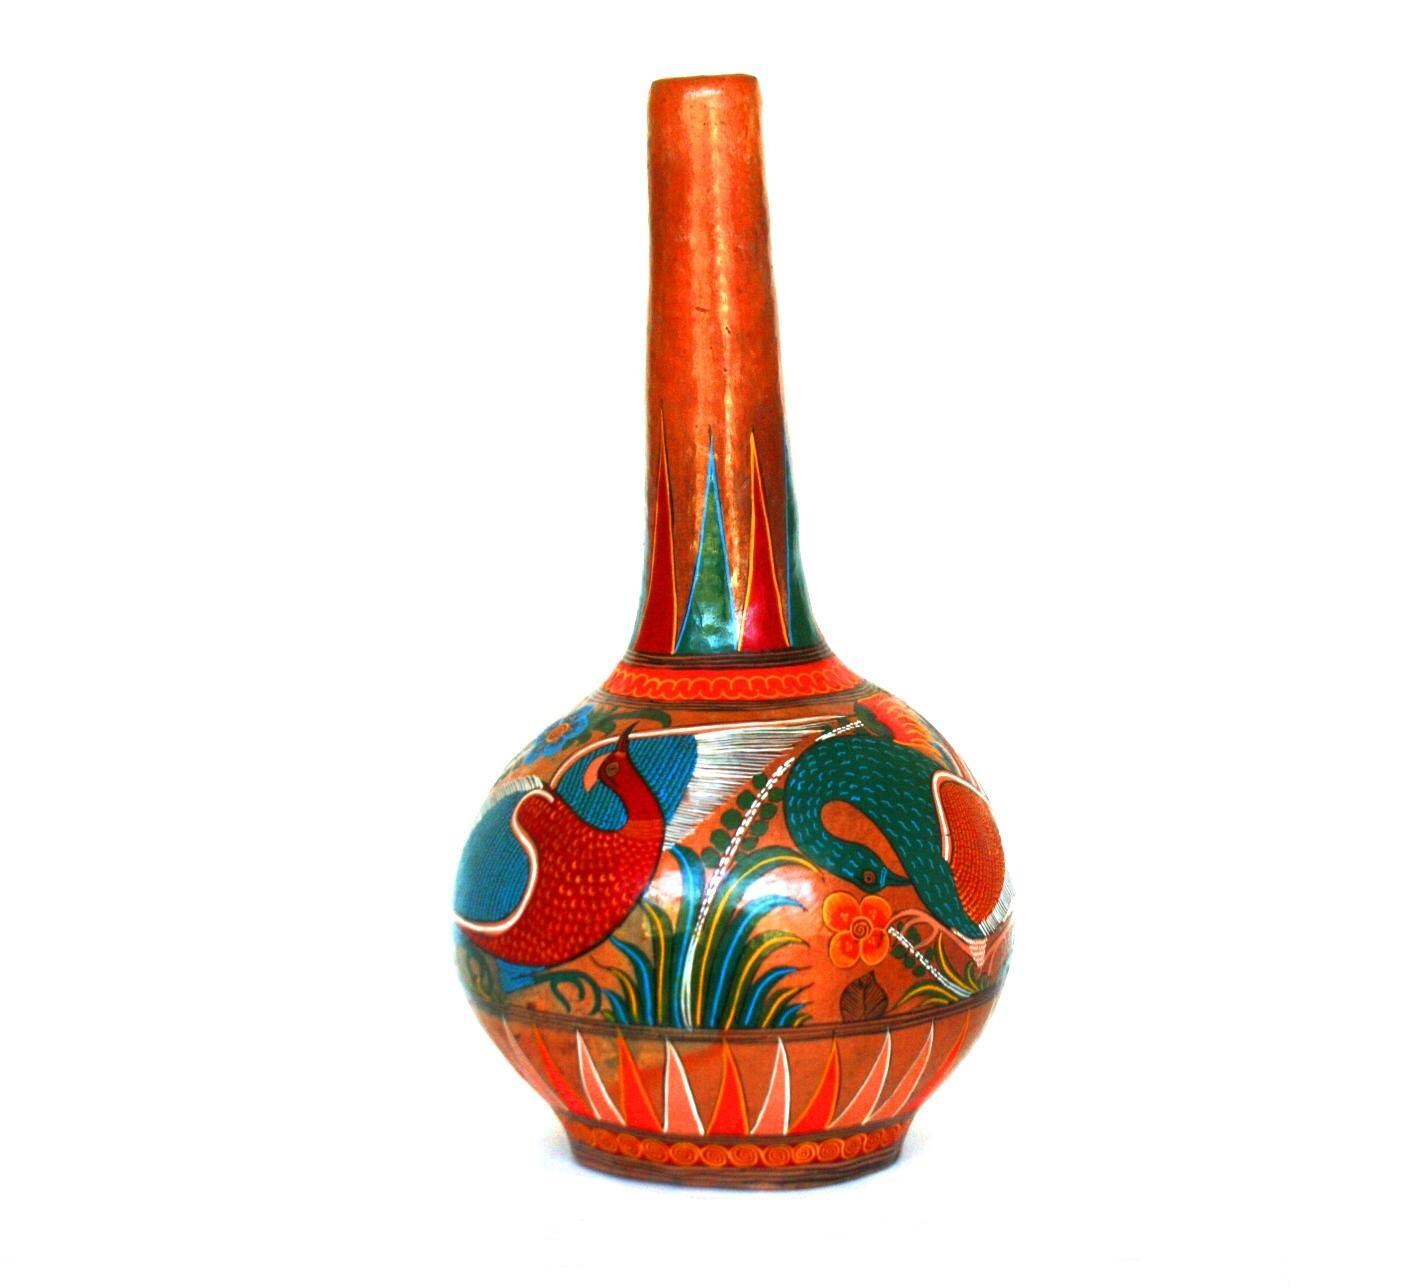 Antique Mexican Pottery Vasel / Tall Bud Vase / Hand Painted